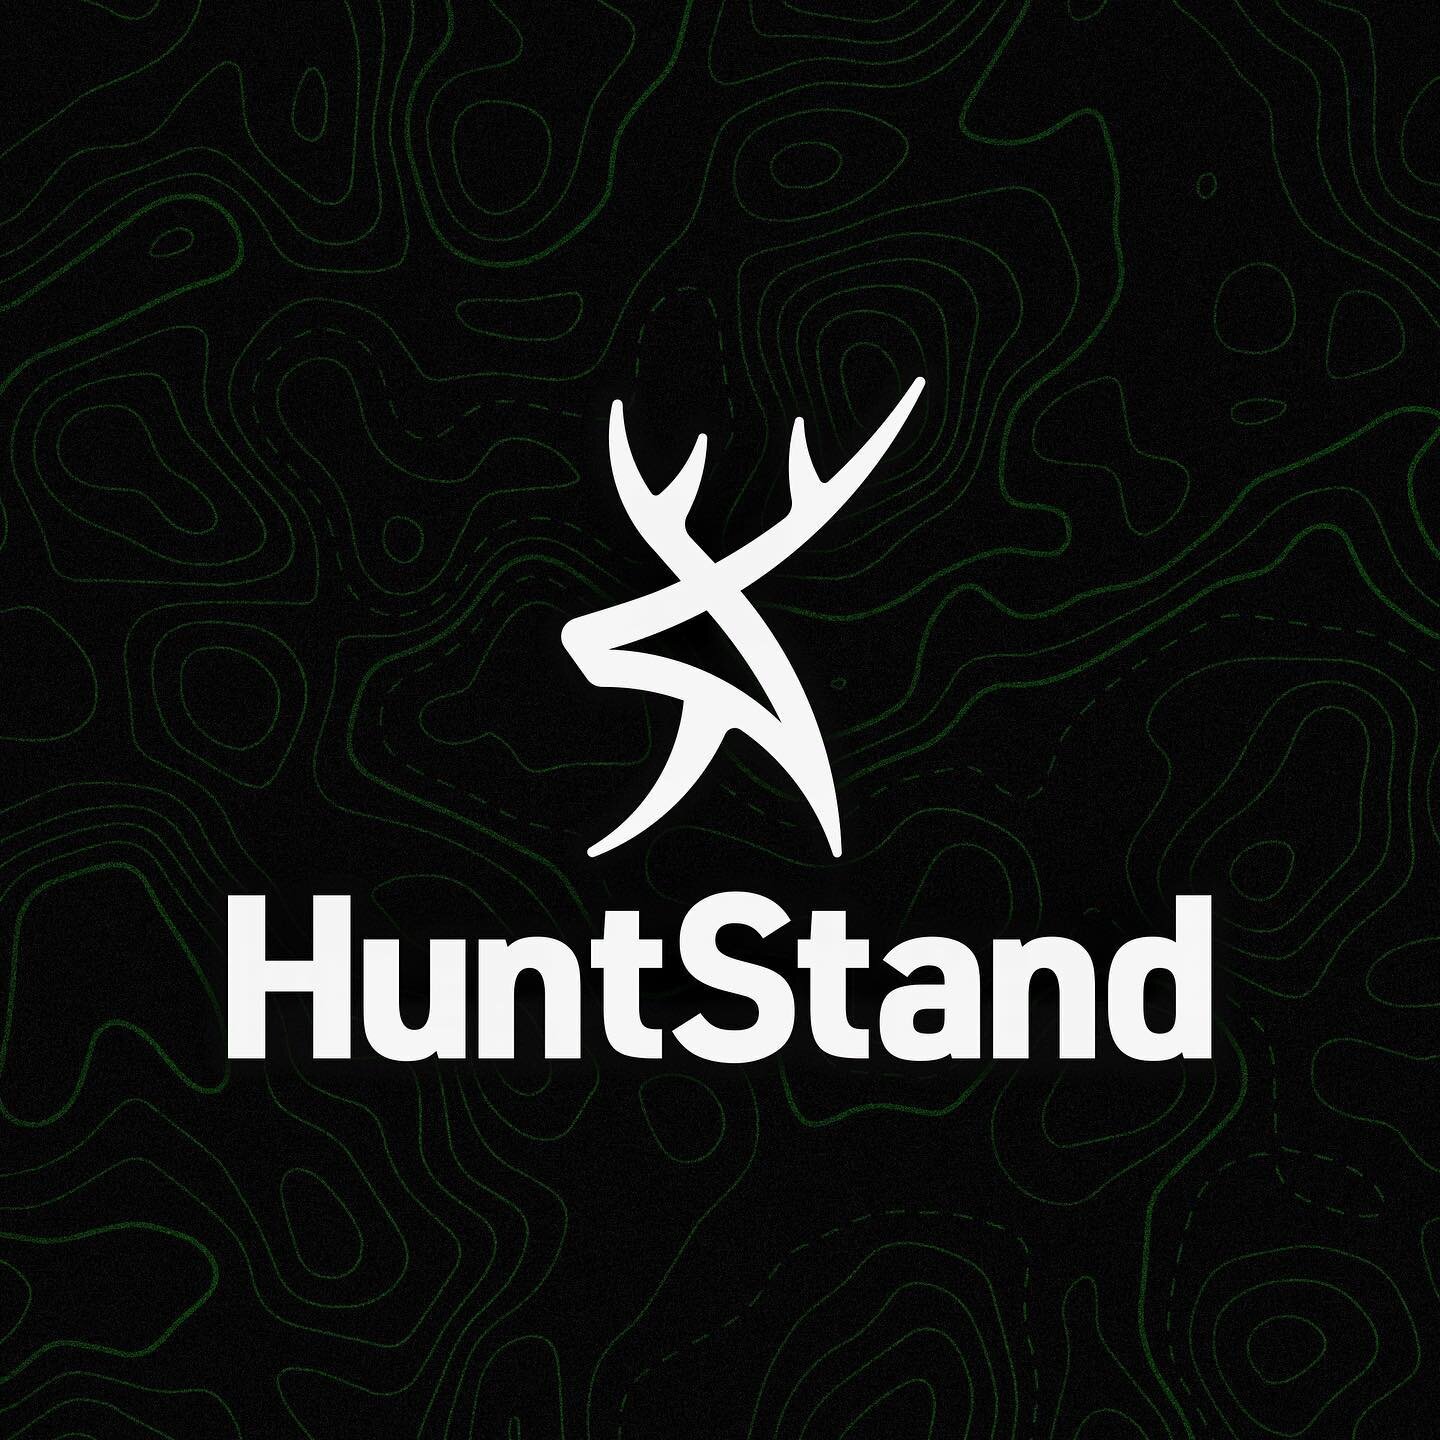 Gridding makes for great branding (swipe to see!)
.
A fantastic logo we created for a great app @huntstand 🦌 
.
Contact us if you need a logo 💌
.
#logo #logos #icon #illustrator #design #identity #designer #vector #logodesigner #branding #logoinspi